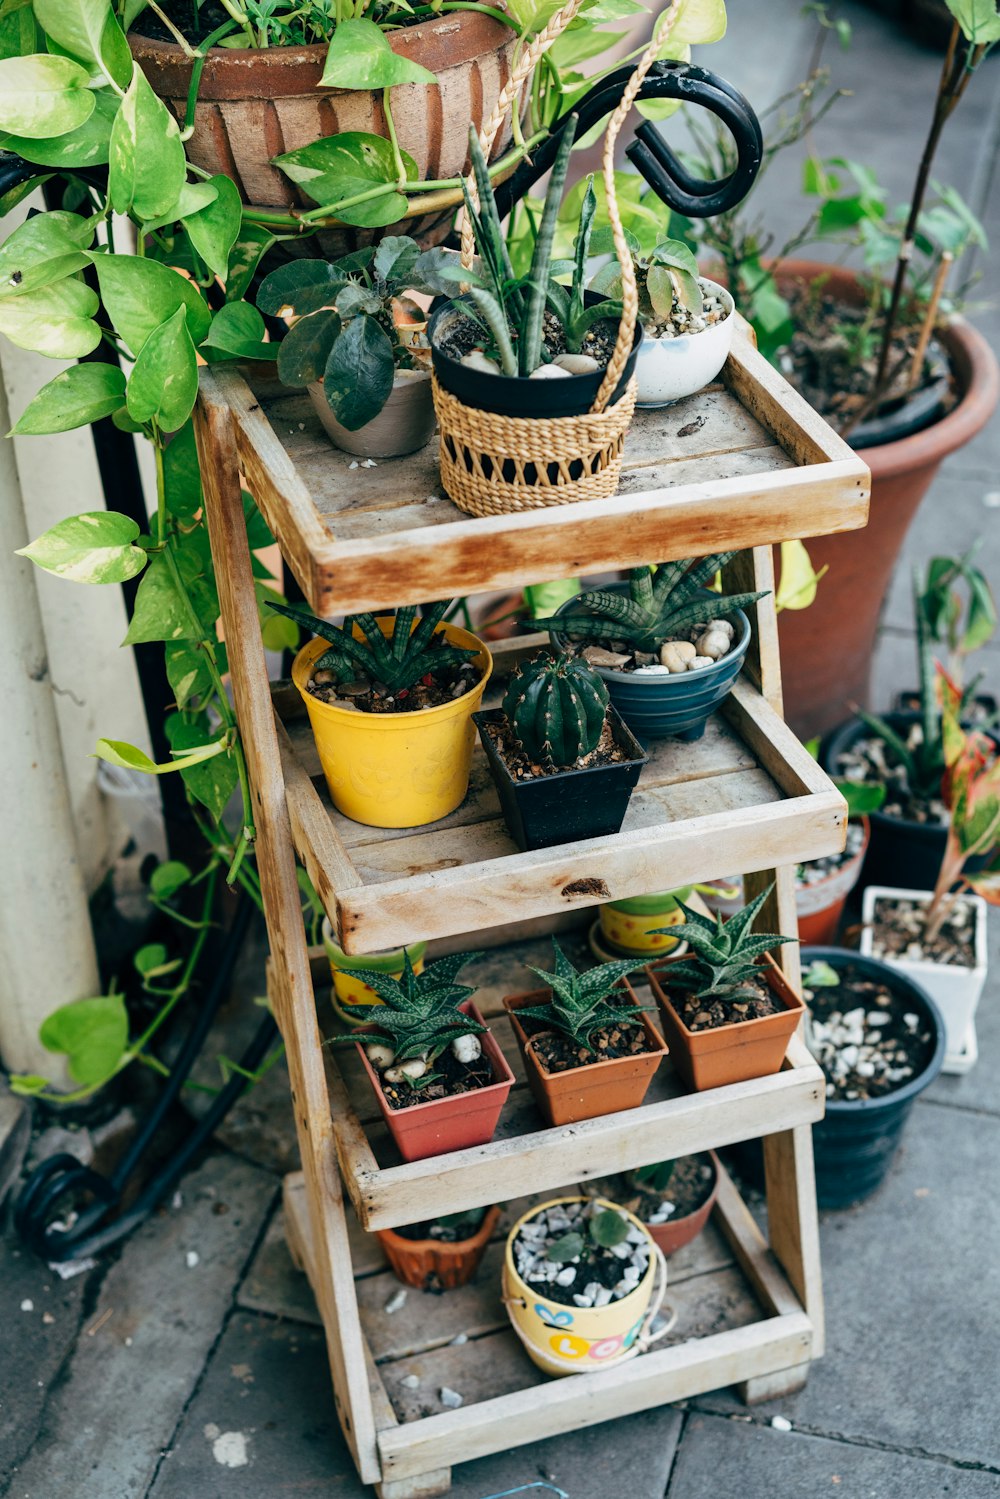 a group of potted plants